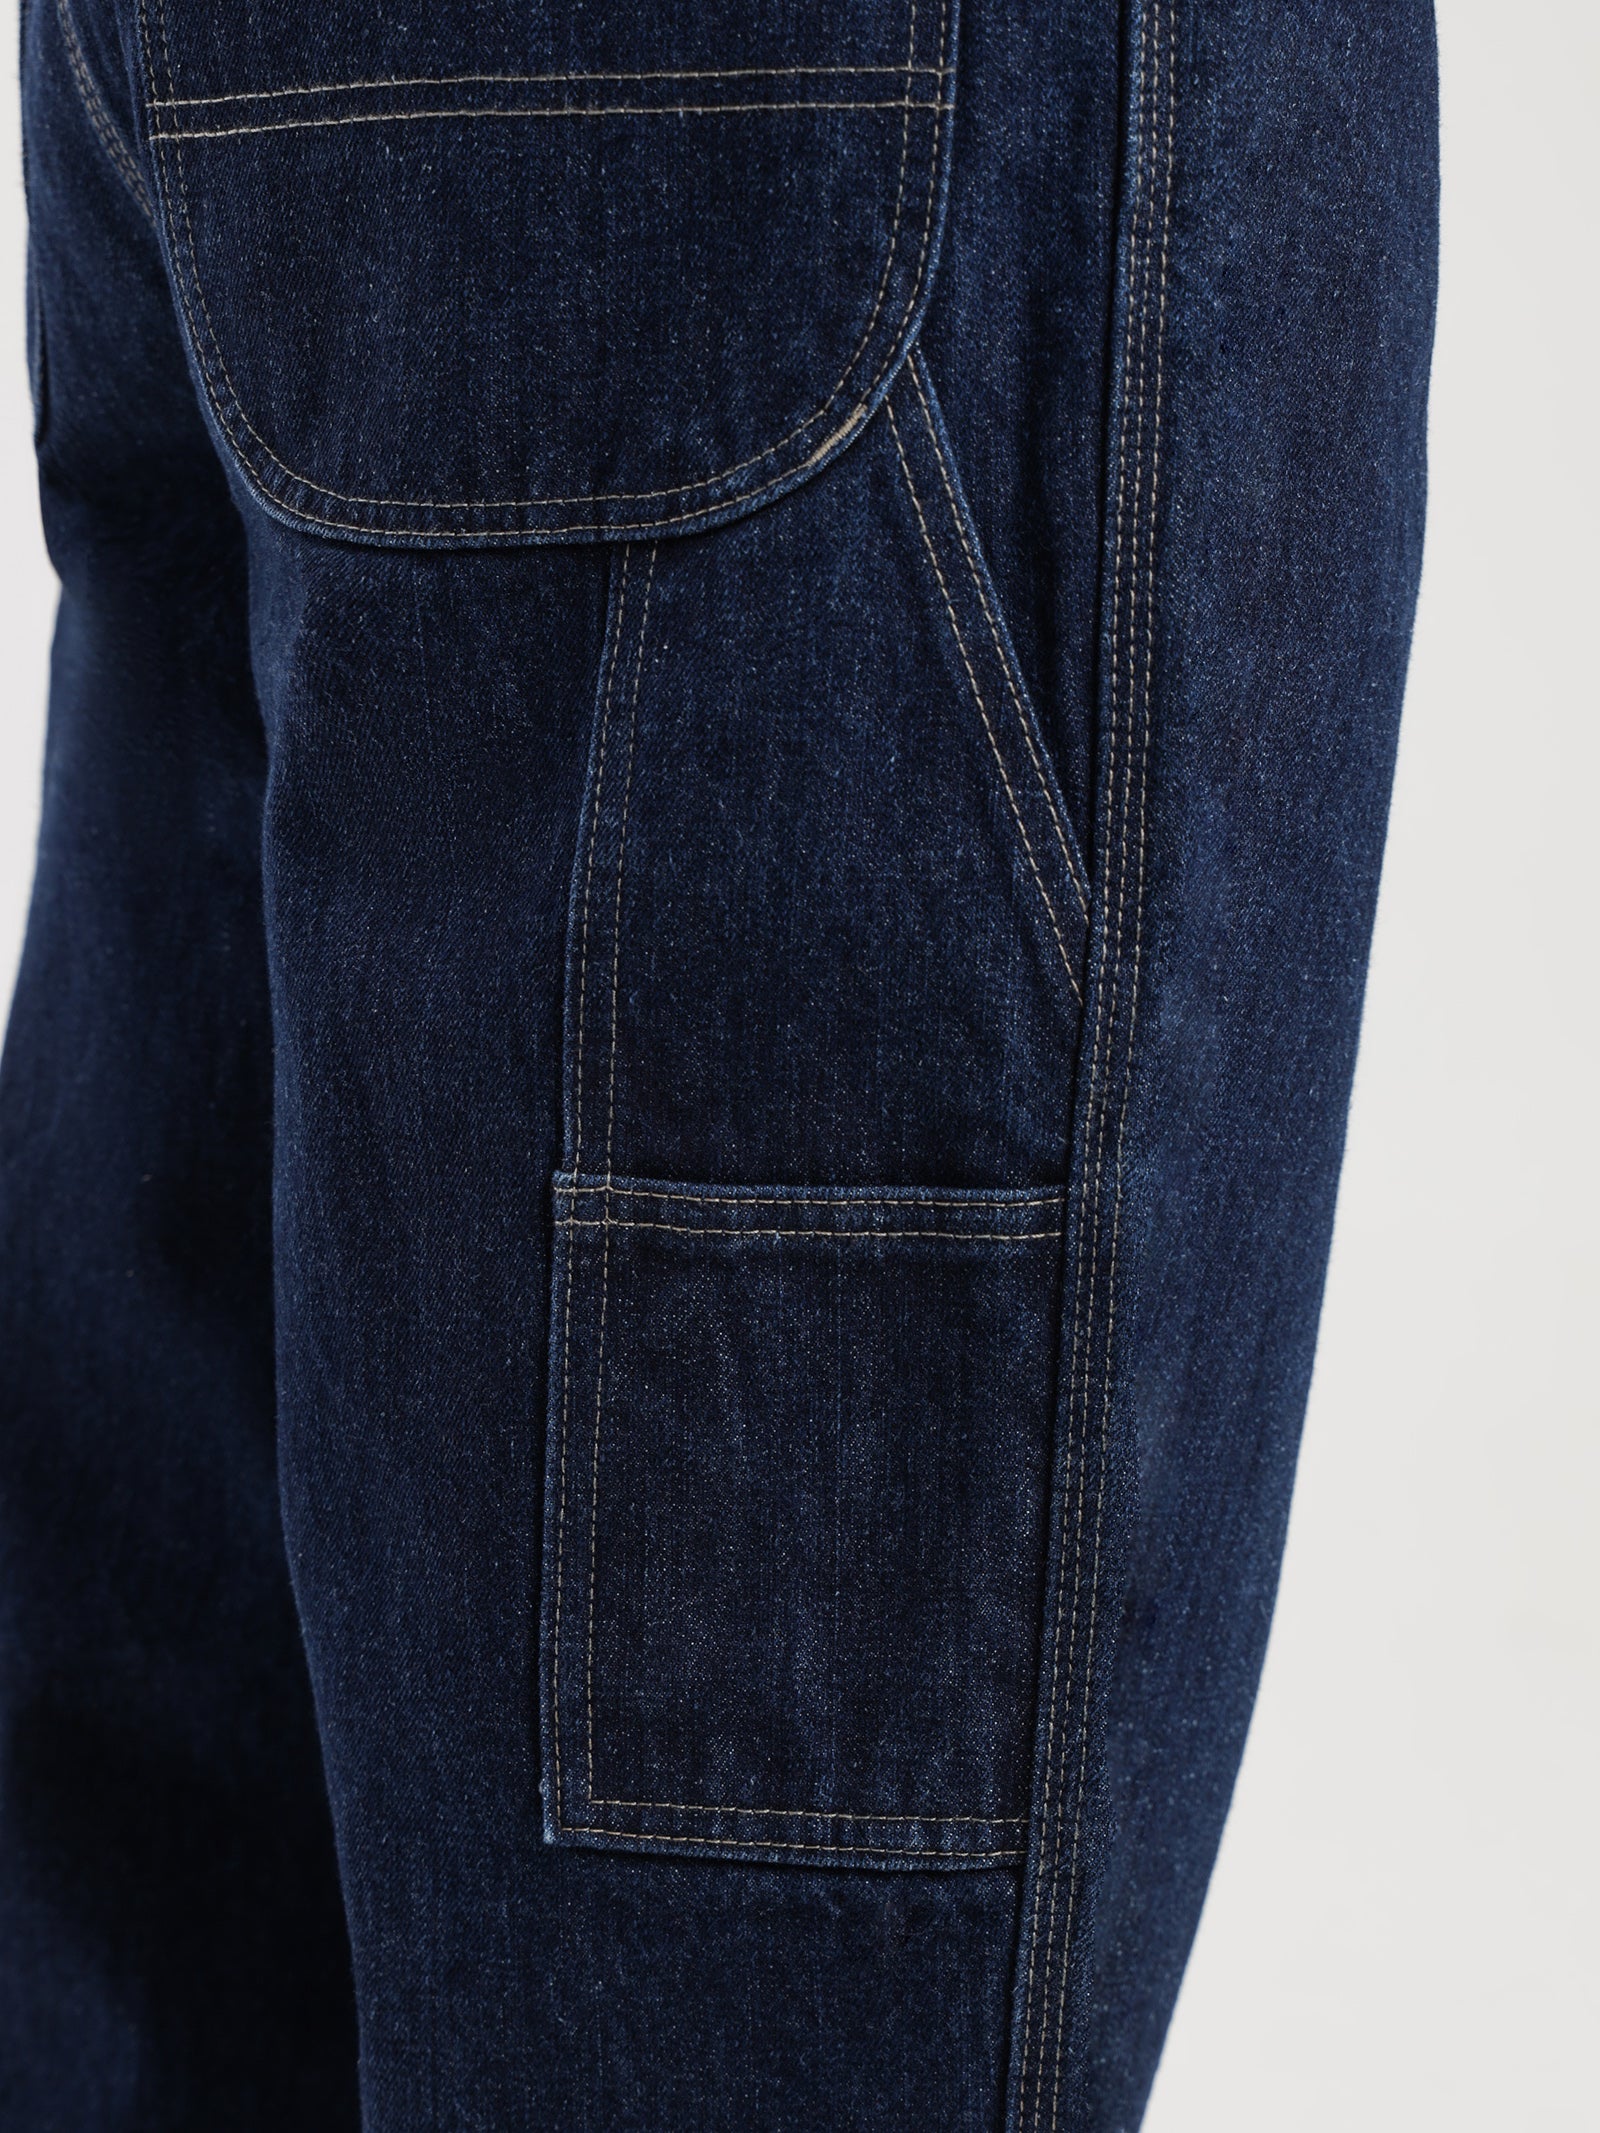 Relaxed Fit Carpenter Jeans in Rinsed Indigo